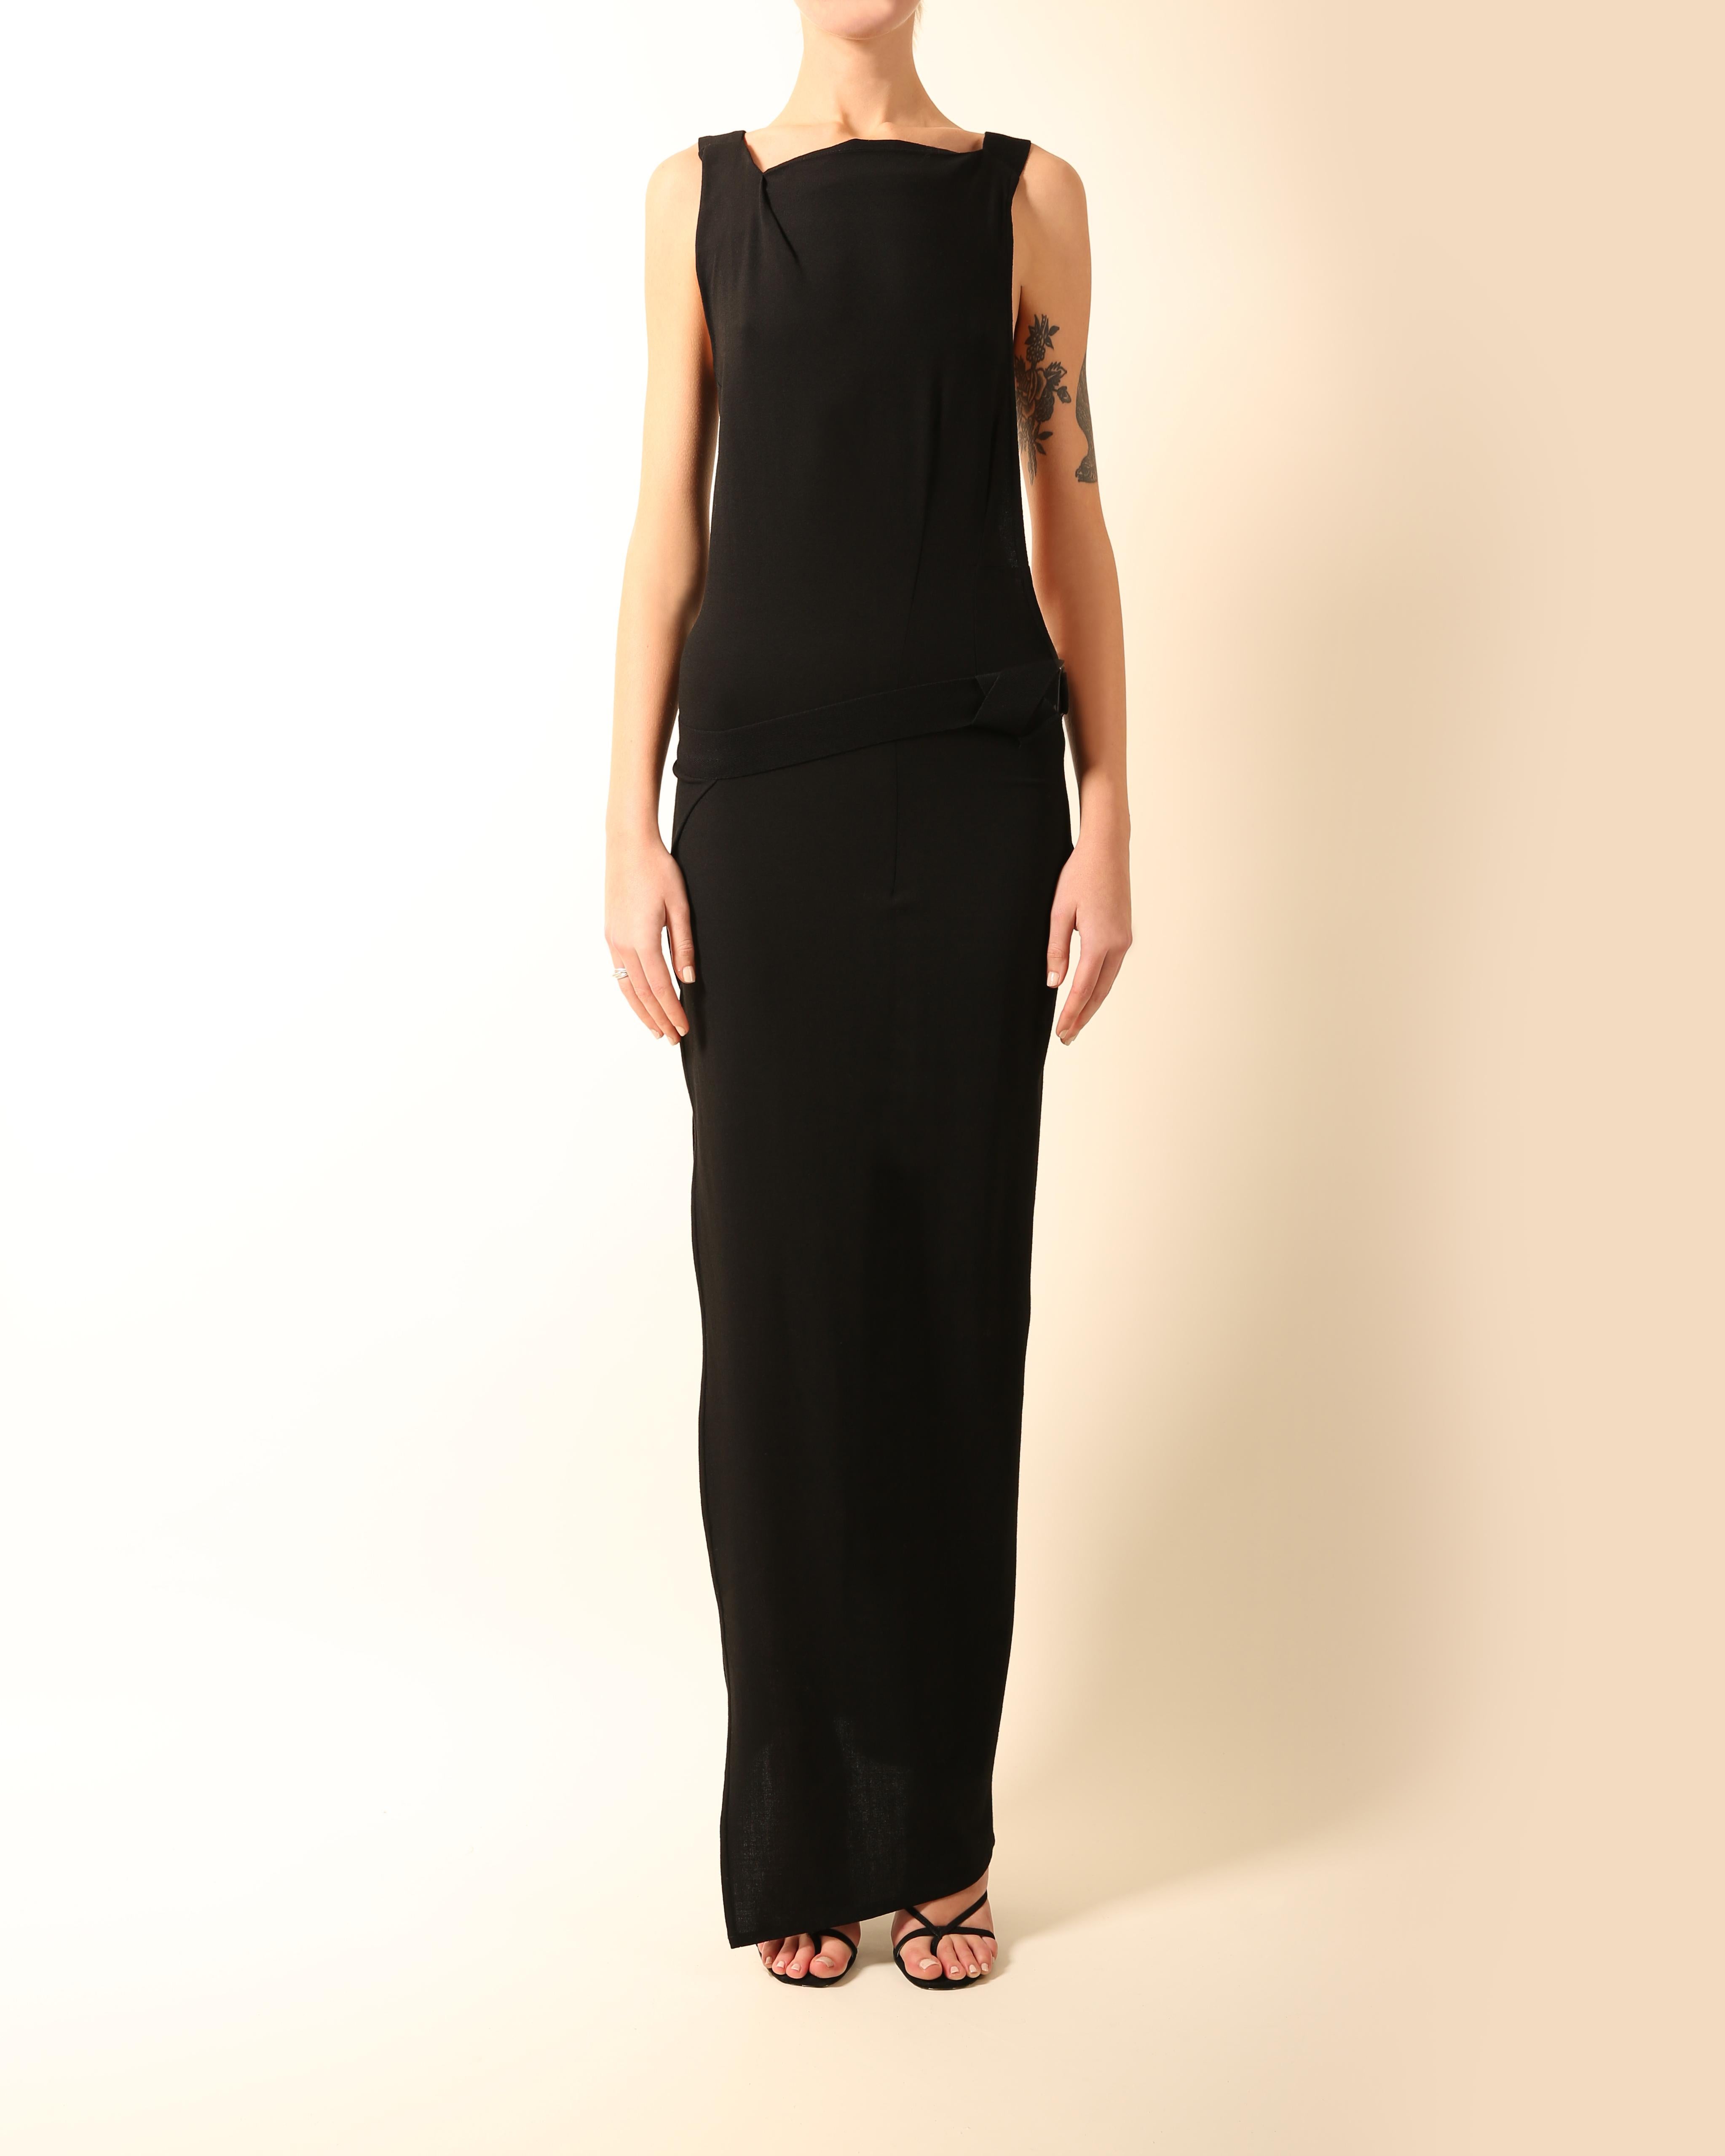 Ann Demeulemeester
Full length black column style dress
Wrap over skirt that fastens via a stretch belt and pull through buckle
Completely backless cut  and sides with a diagonal strap across the back
Stretch fabric
Concealed side zip

FREE SHIPPING